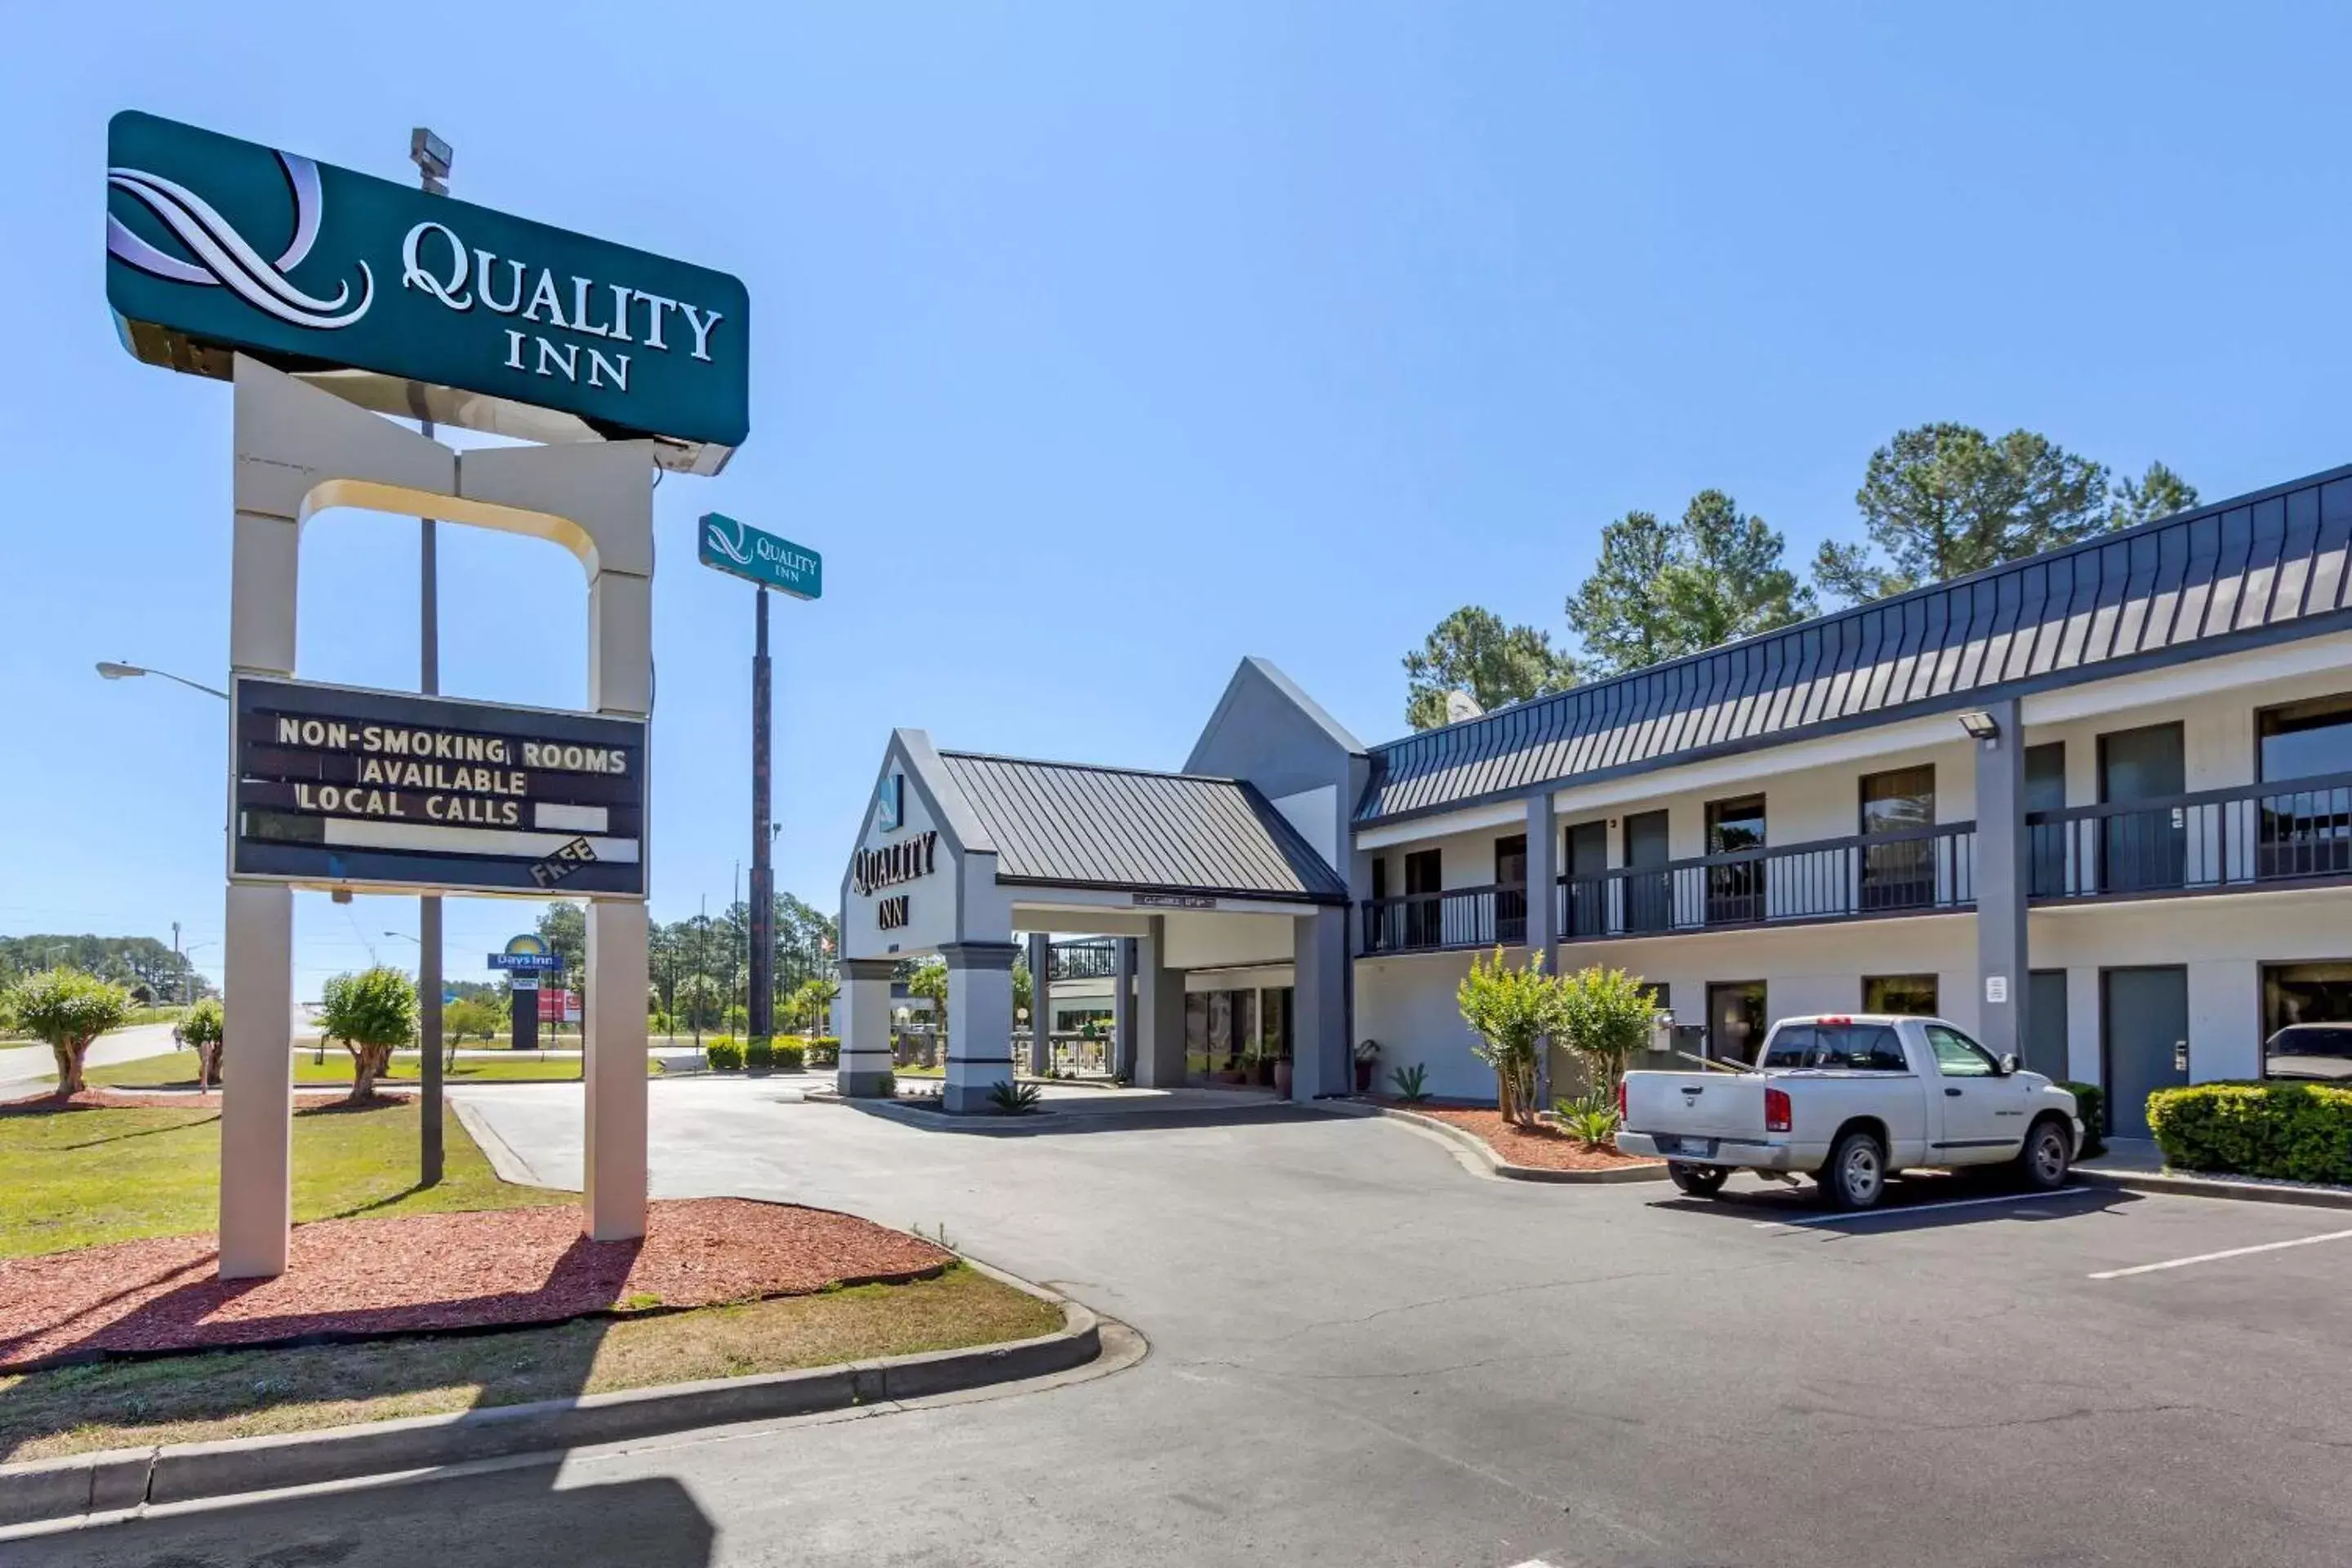 Property Building in Quality Inn Walterboro